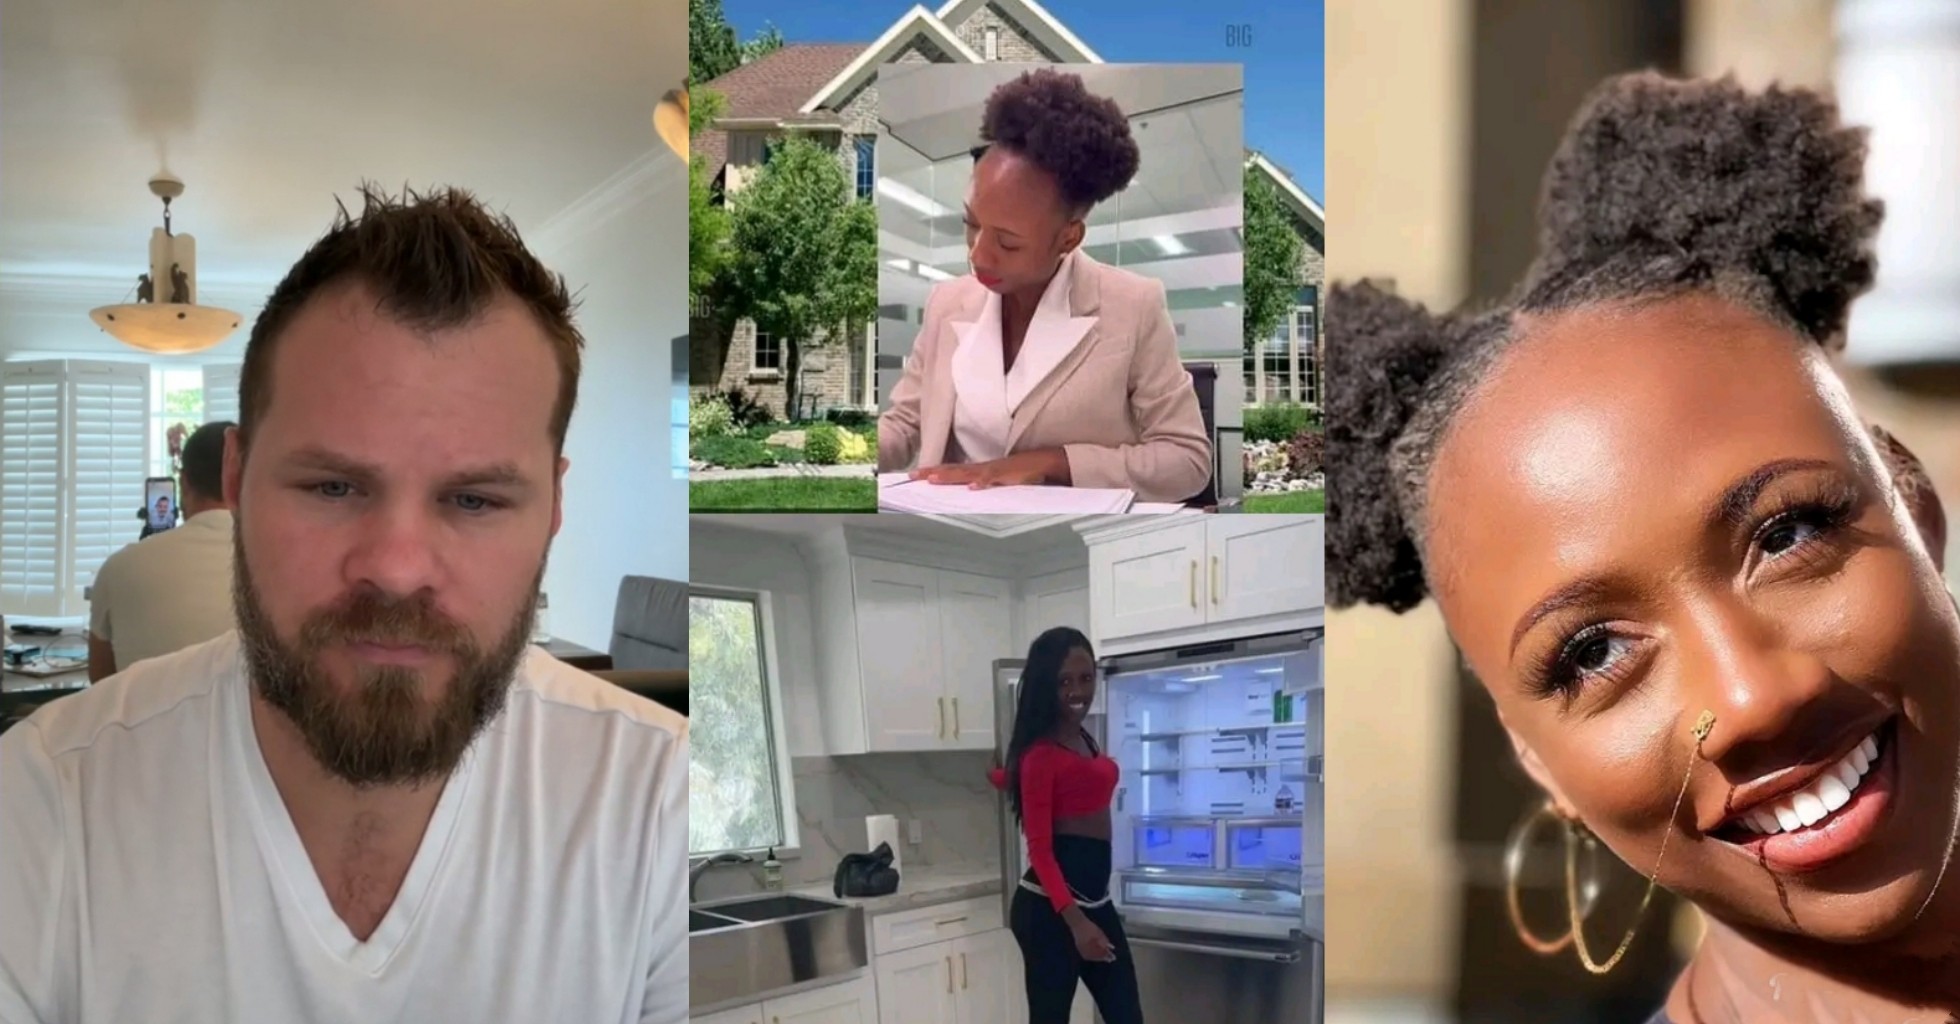 Justin Dean under heavy criticism over his comment on Korra Obidi’s new .6m home in Los Angeles